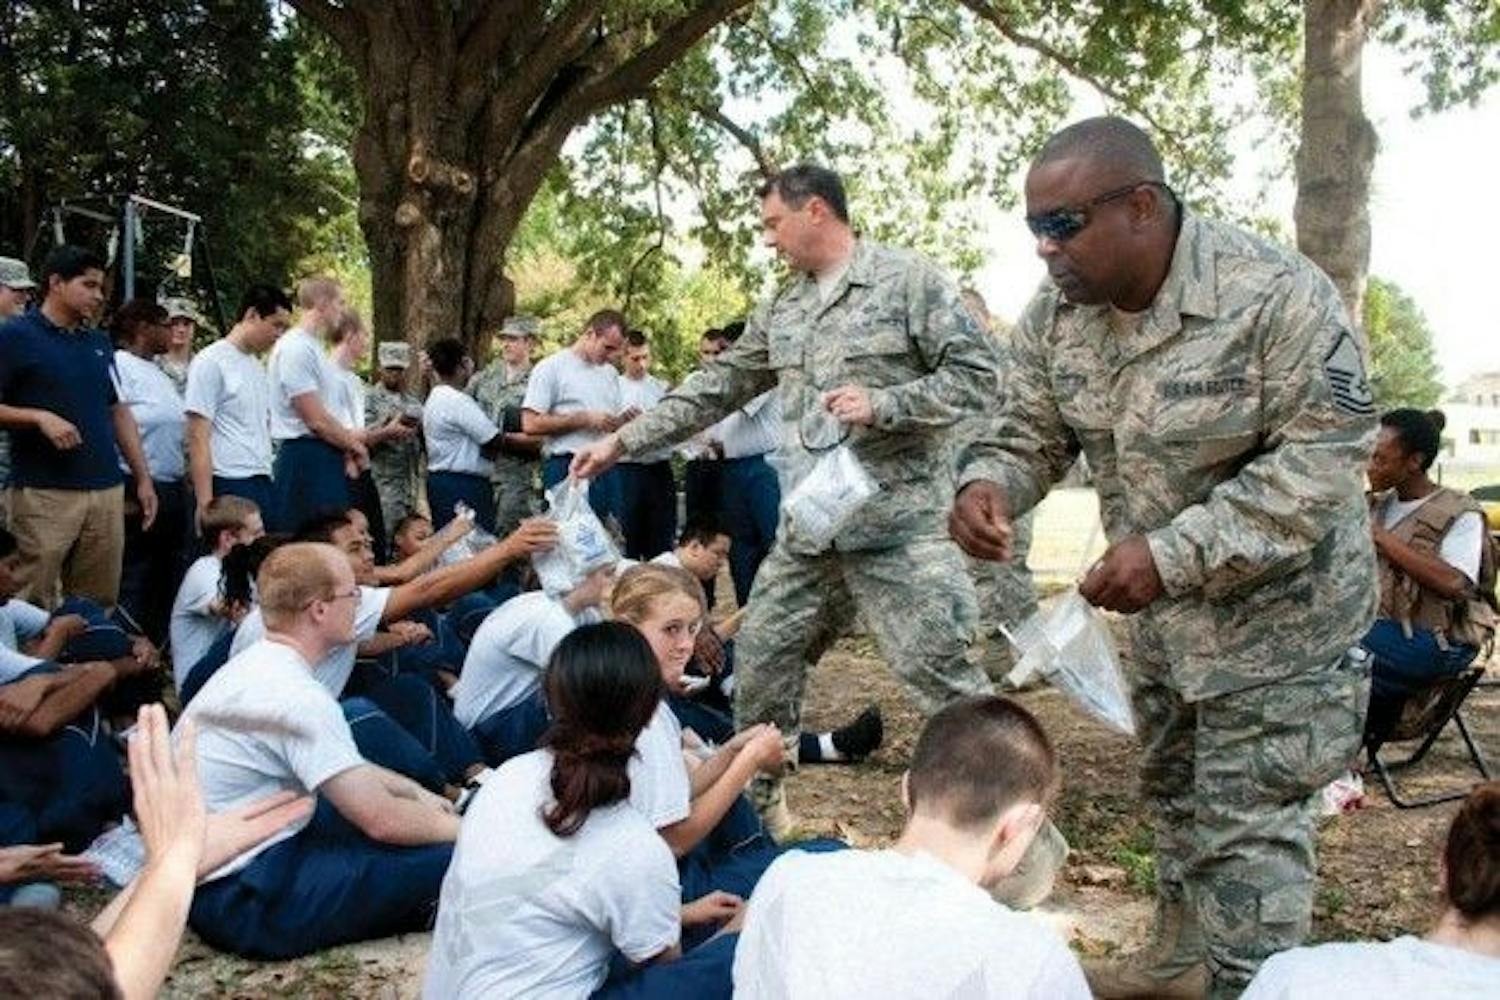 Air Force training equips UM ROTC for survival